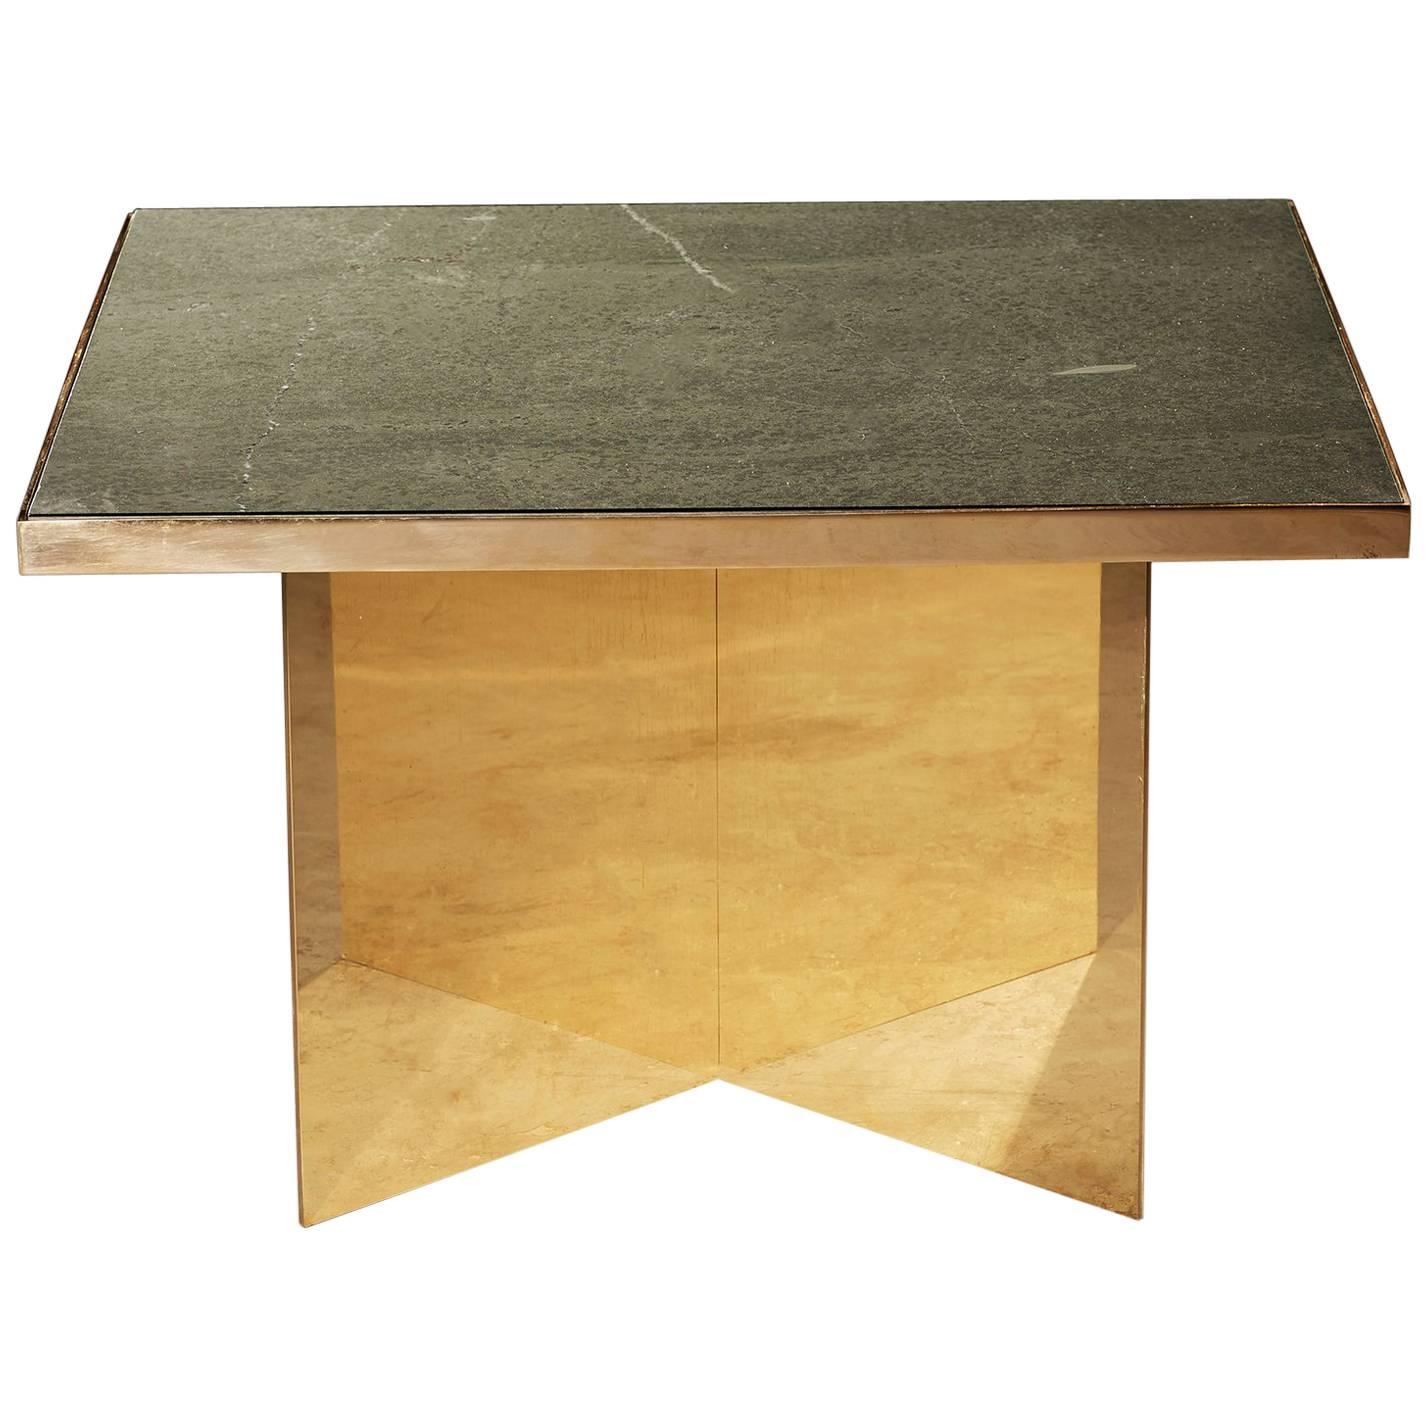 Verdi Coffee Table — Large — Solid Brass Plate Base — Honed Cumbrian Slate Top